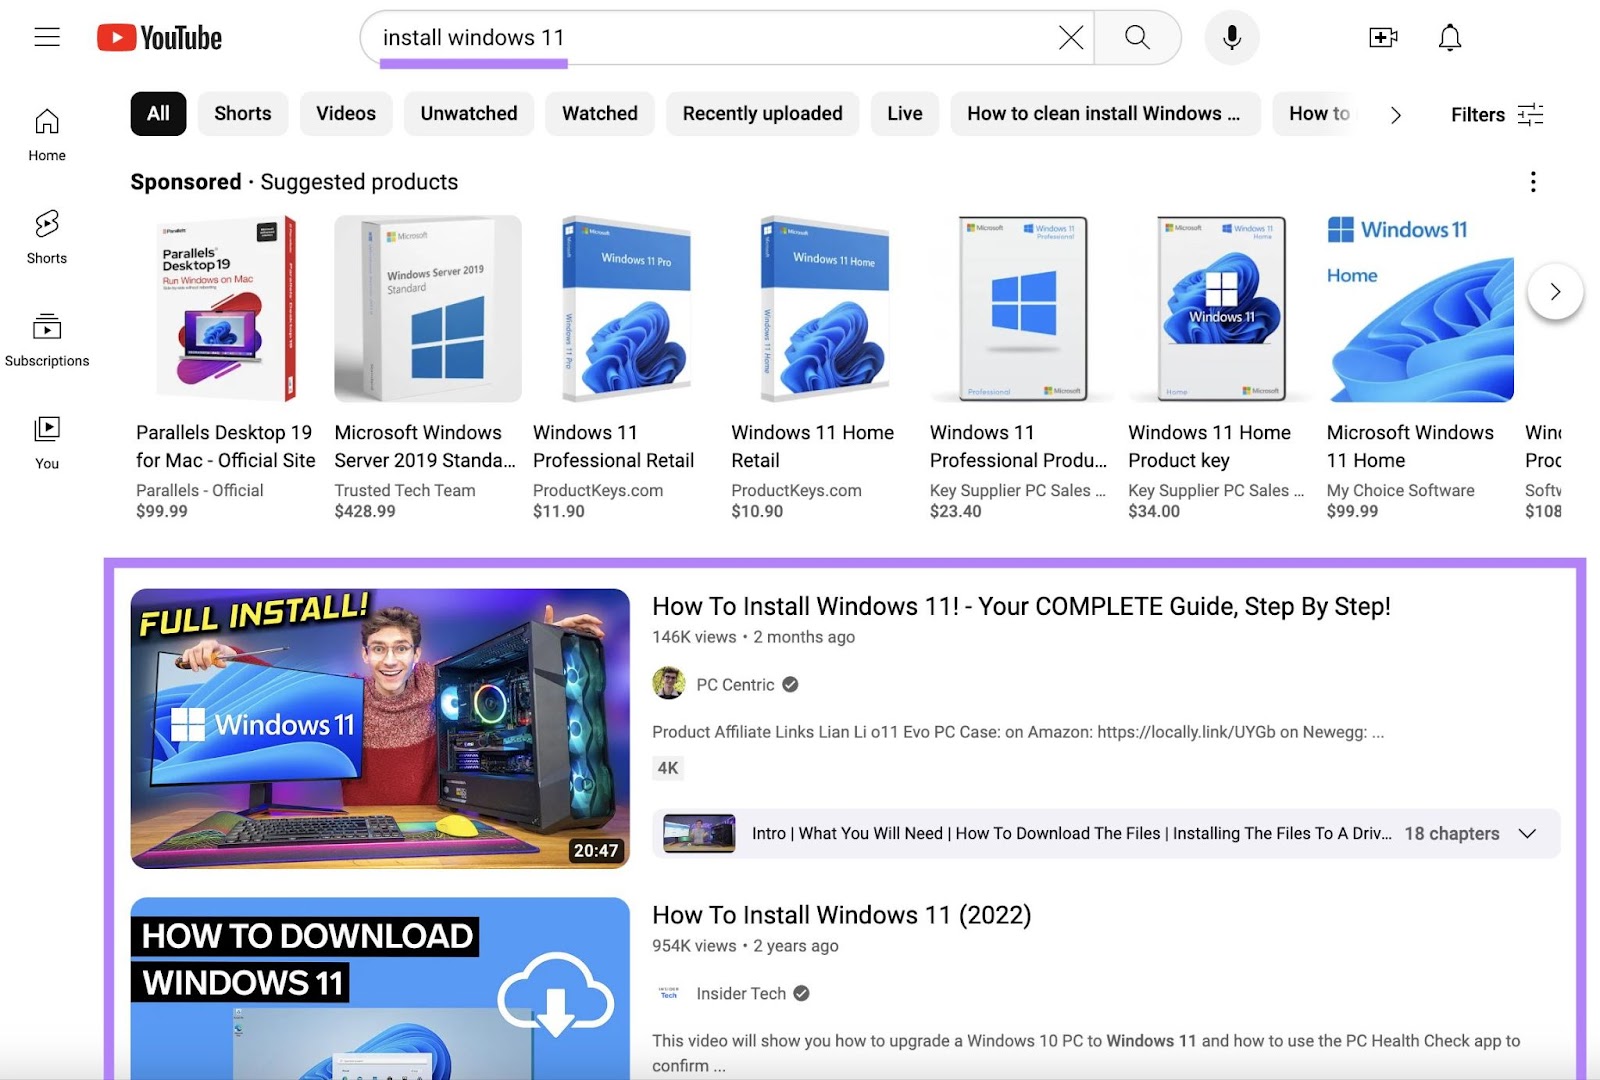 YouTube’s search results for "install windows 11"